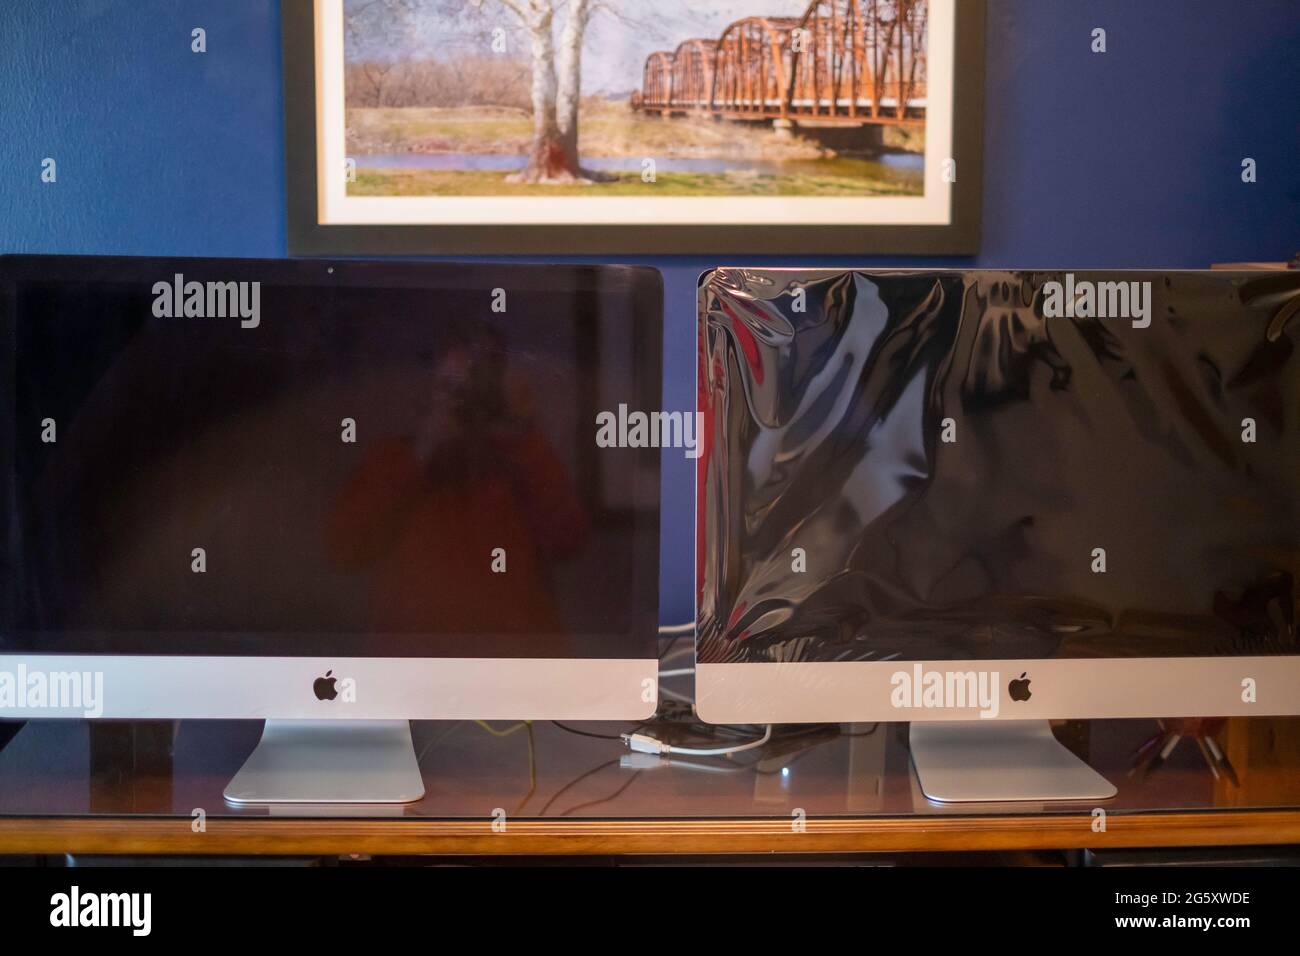 2013 iMac sitting beside a 2020 new iMac on an  home office desk. Stock Photo